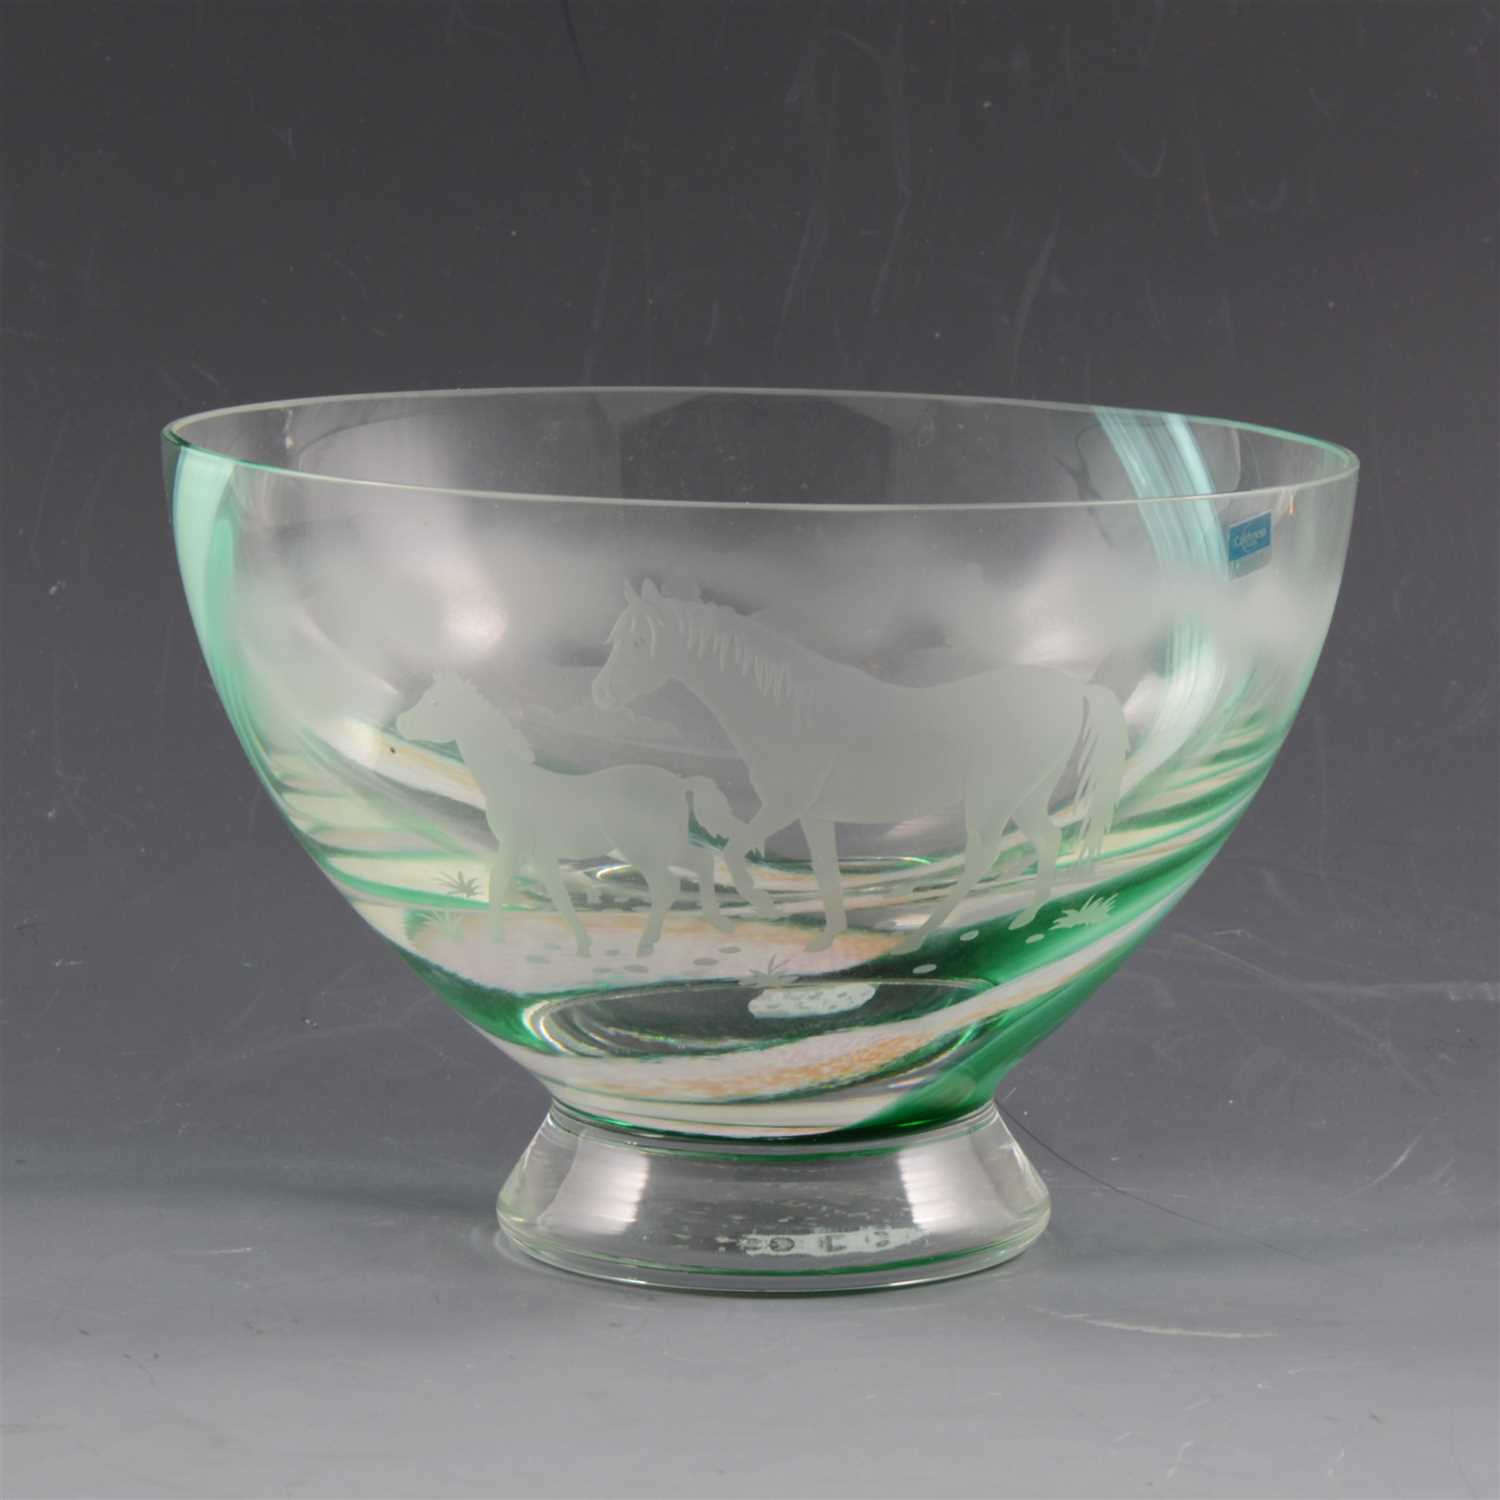 Lot 24 - Caithness Glass footed bowl, acid etched with horse and foal in a landscape